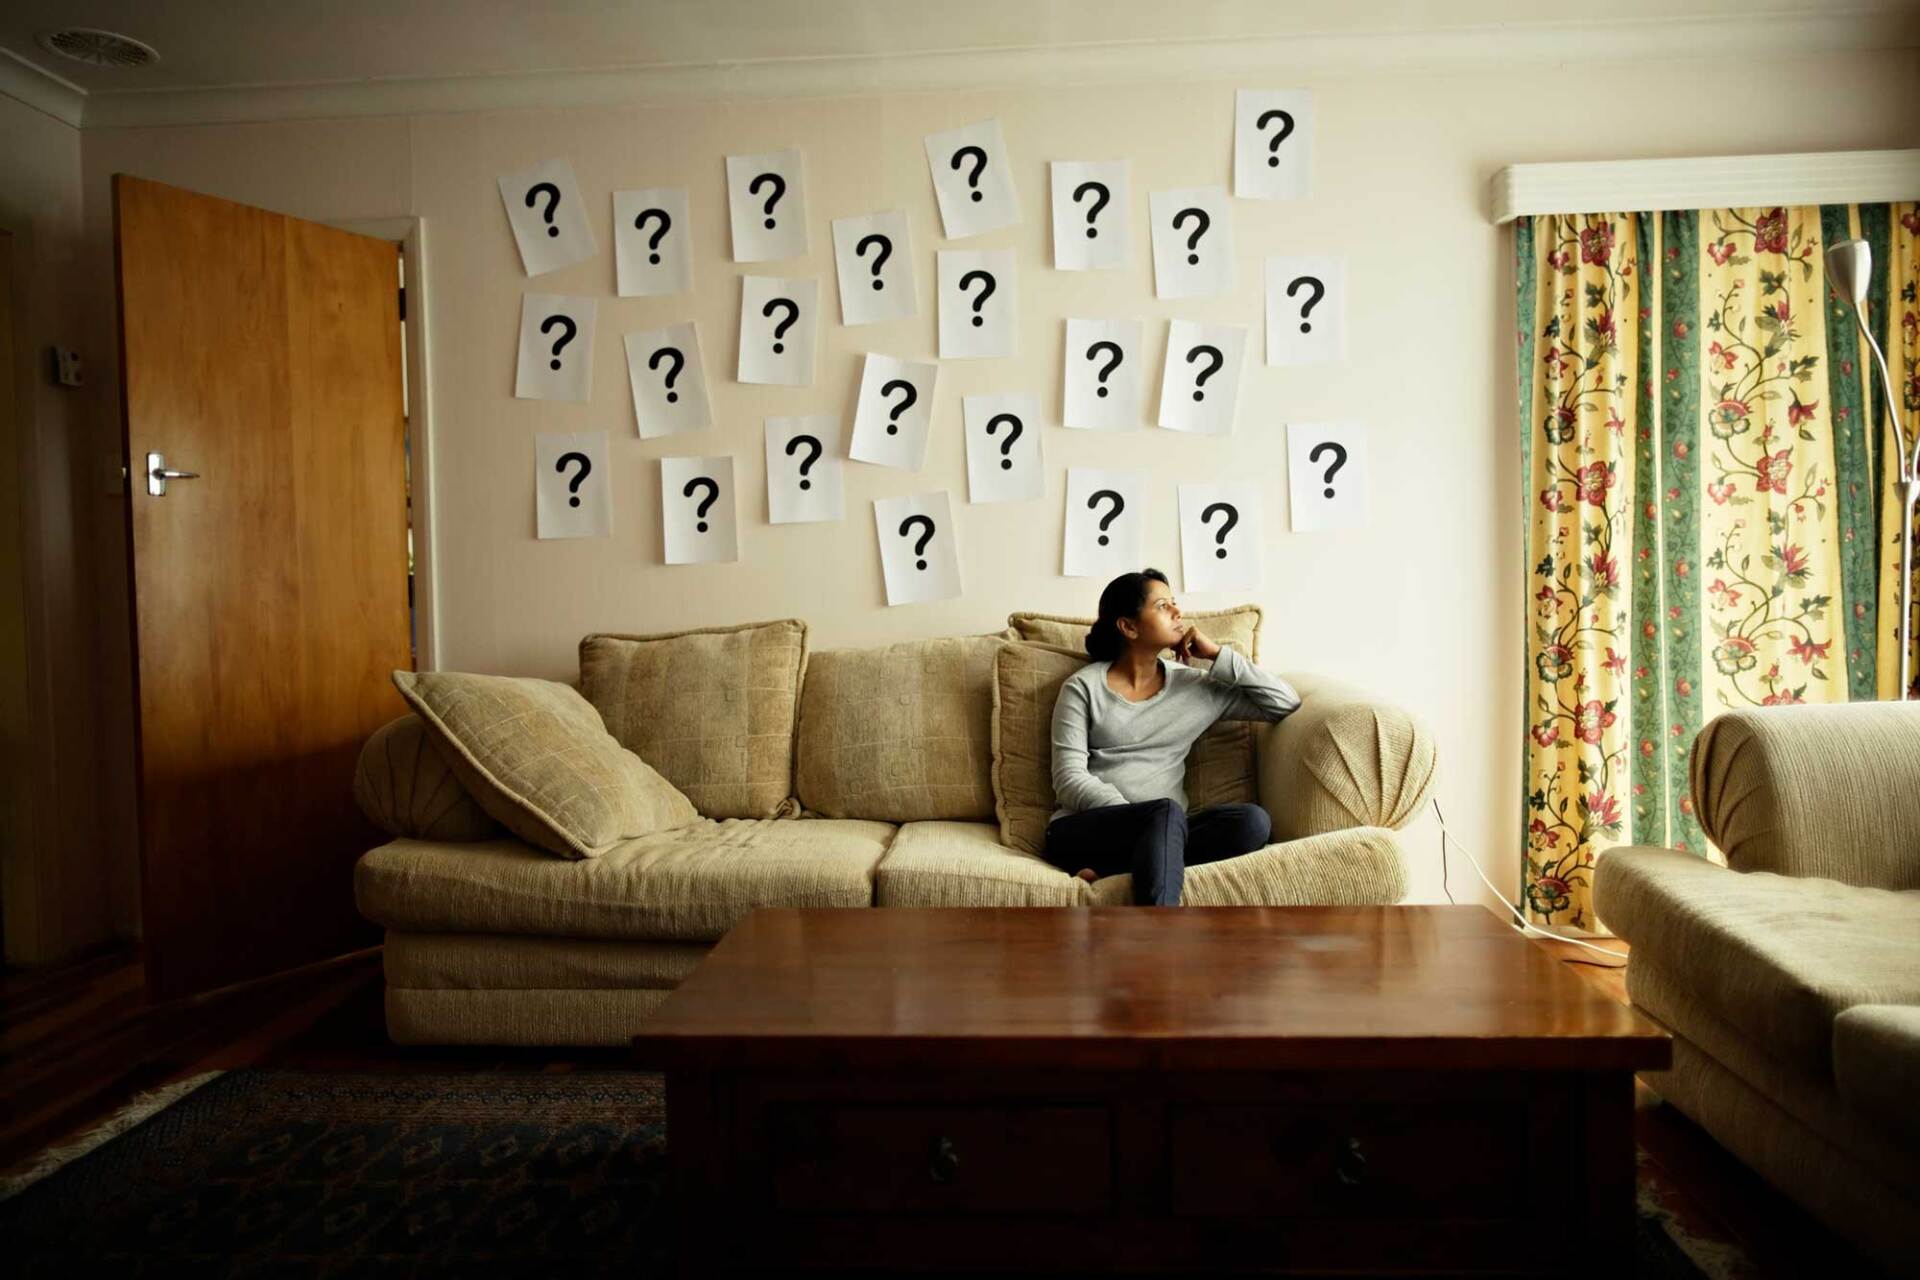 Question Marks on the Wall and a Woman Sitting on Sofa  — White Plains, NY — Dr. Henry B. Hartman